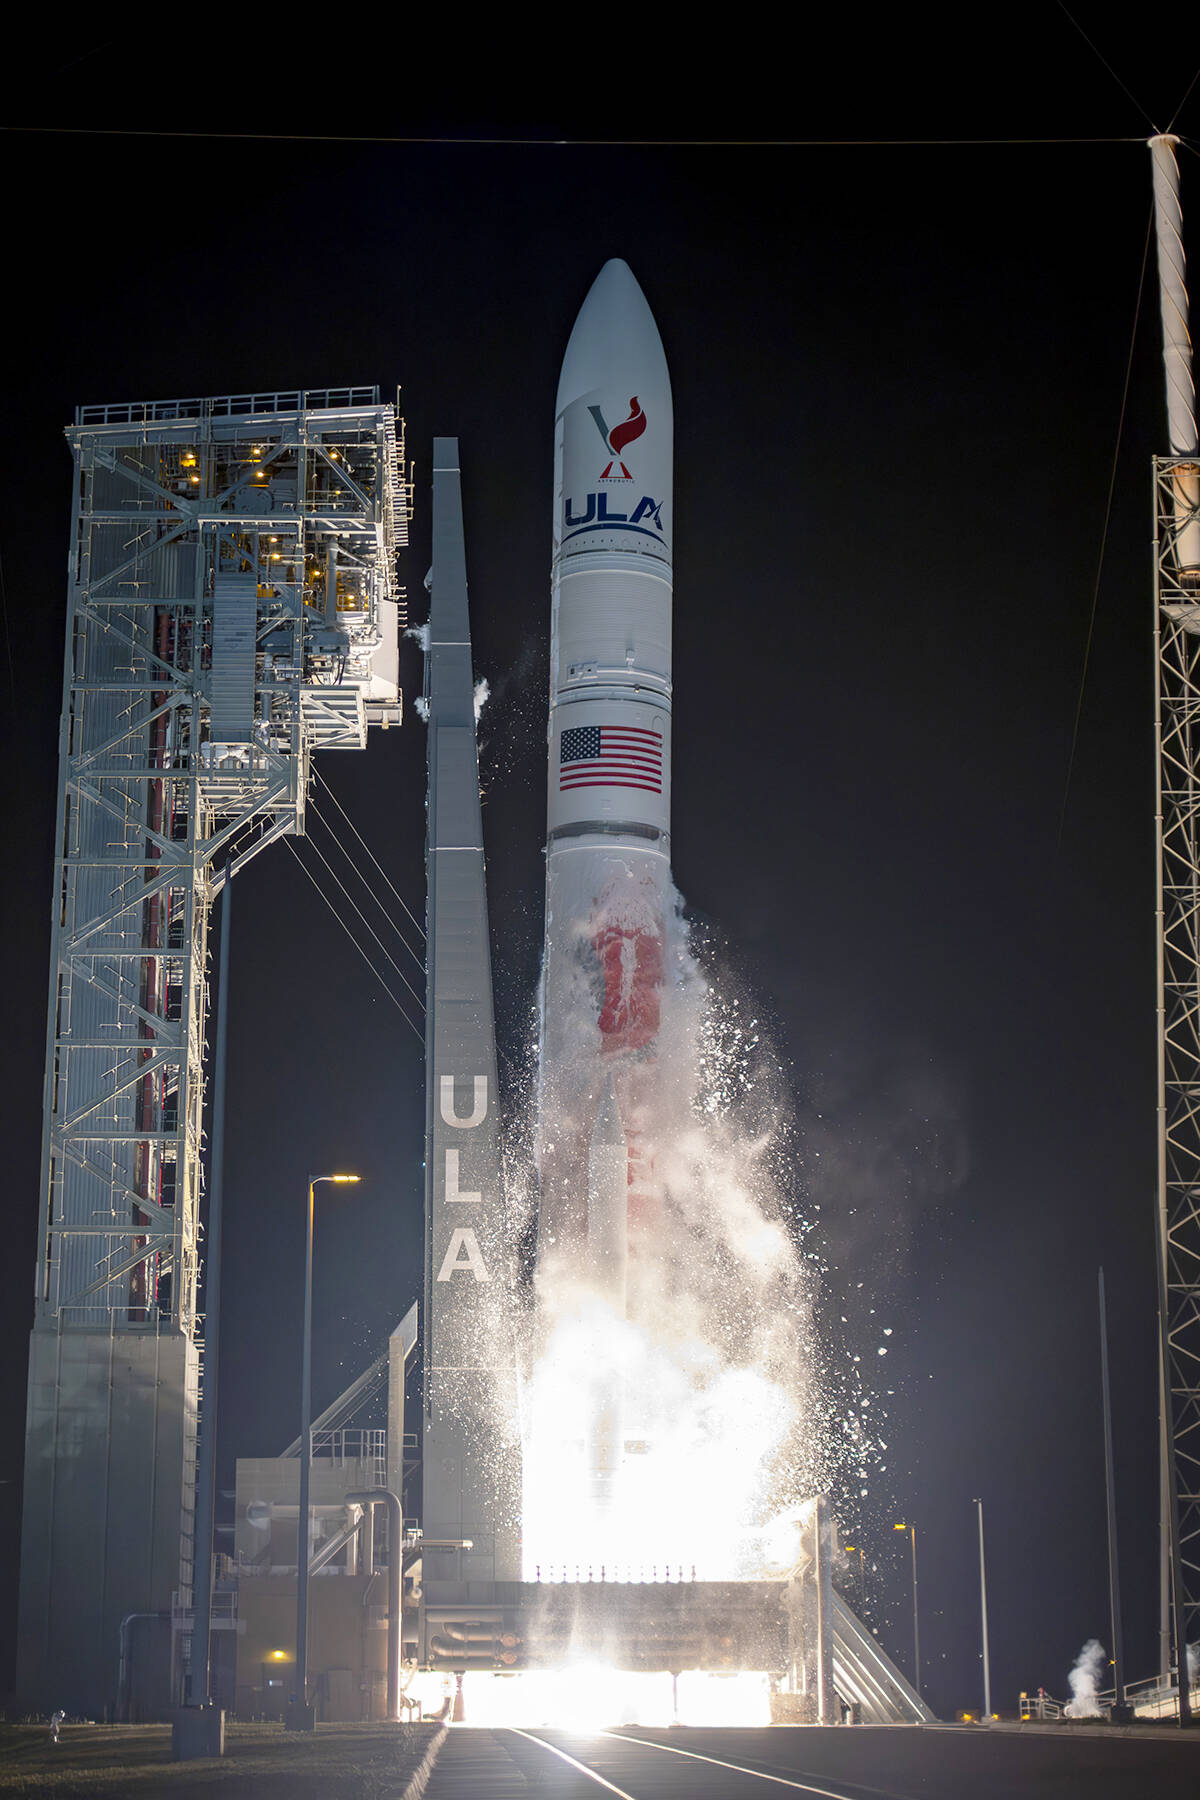 A United Launch Alliance Vulcan rocket, with two engines built by Kent’s Blue Origin, lifts on Jan. 8 from Cape Canaveral Space Force Station in Florida. COURTESY PHOTO, NASA